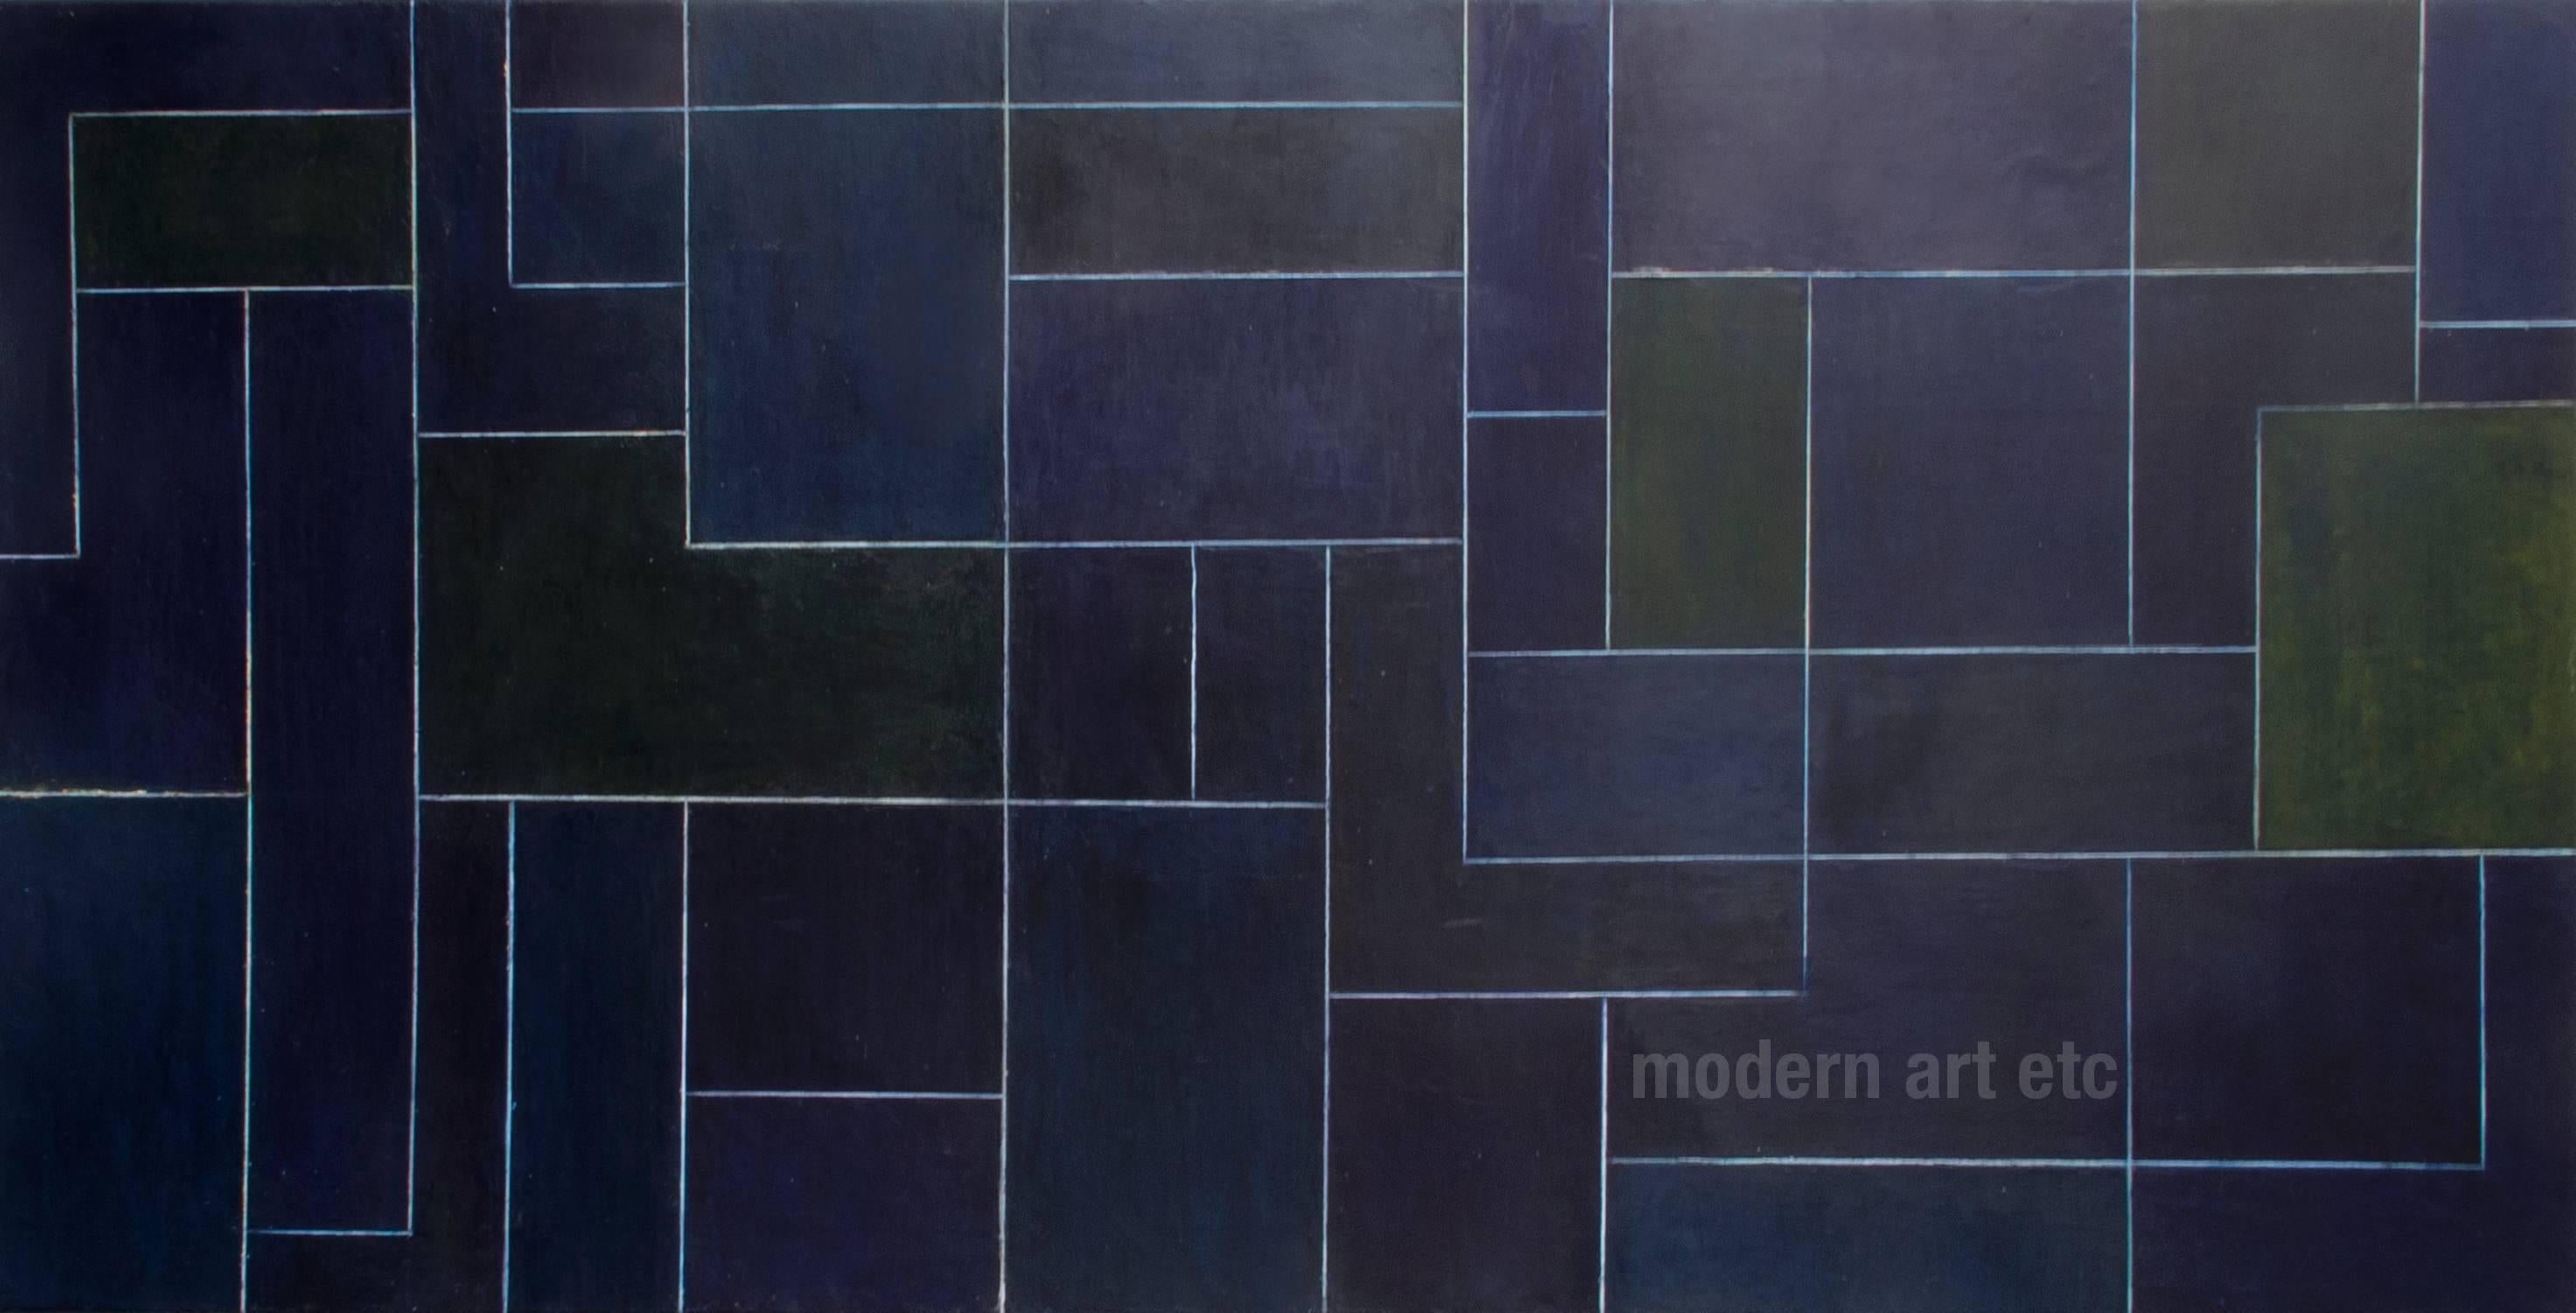 Stephen Cimini Abstract Painting - 36x76x2" Large horizontal oil painting - Midnight - architectural, color